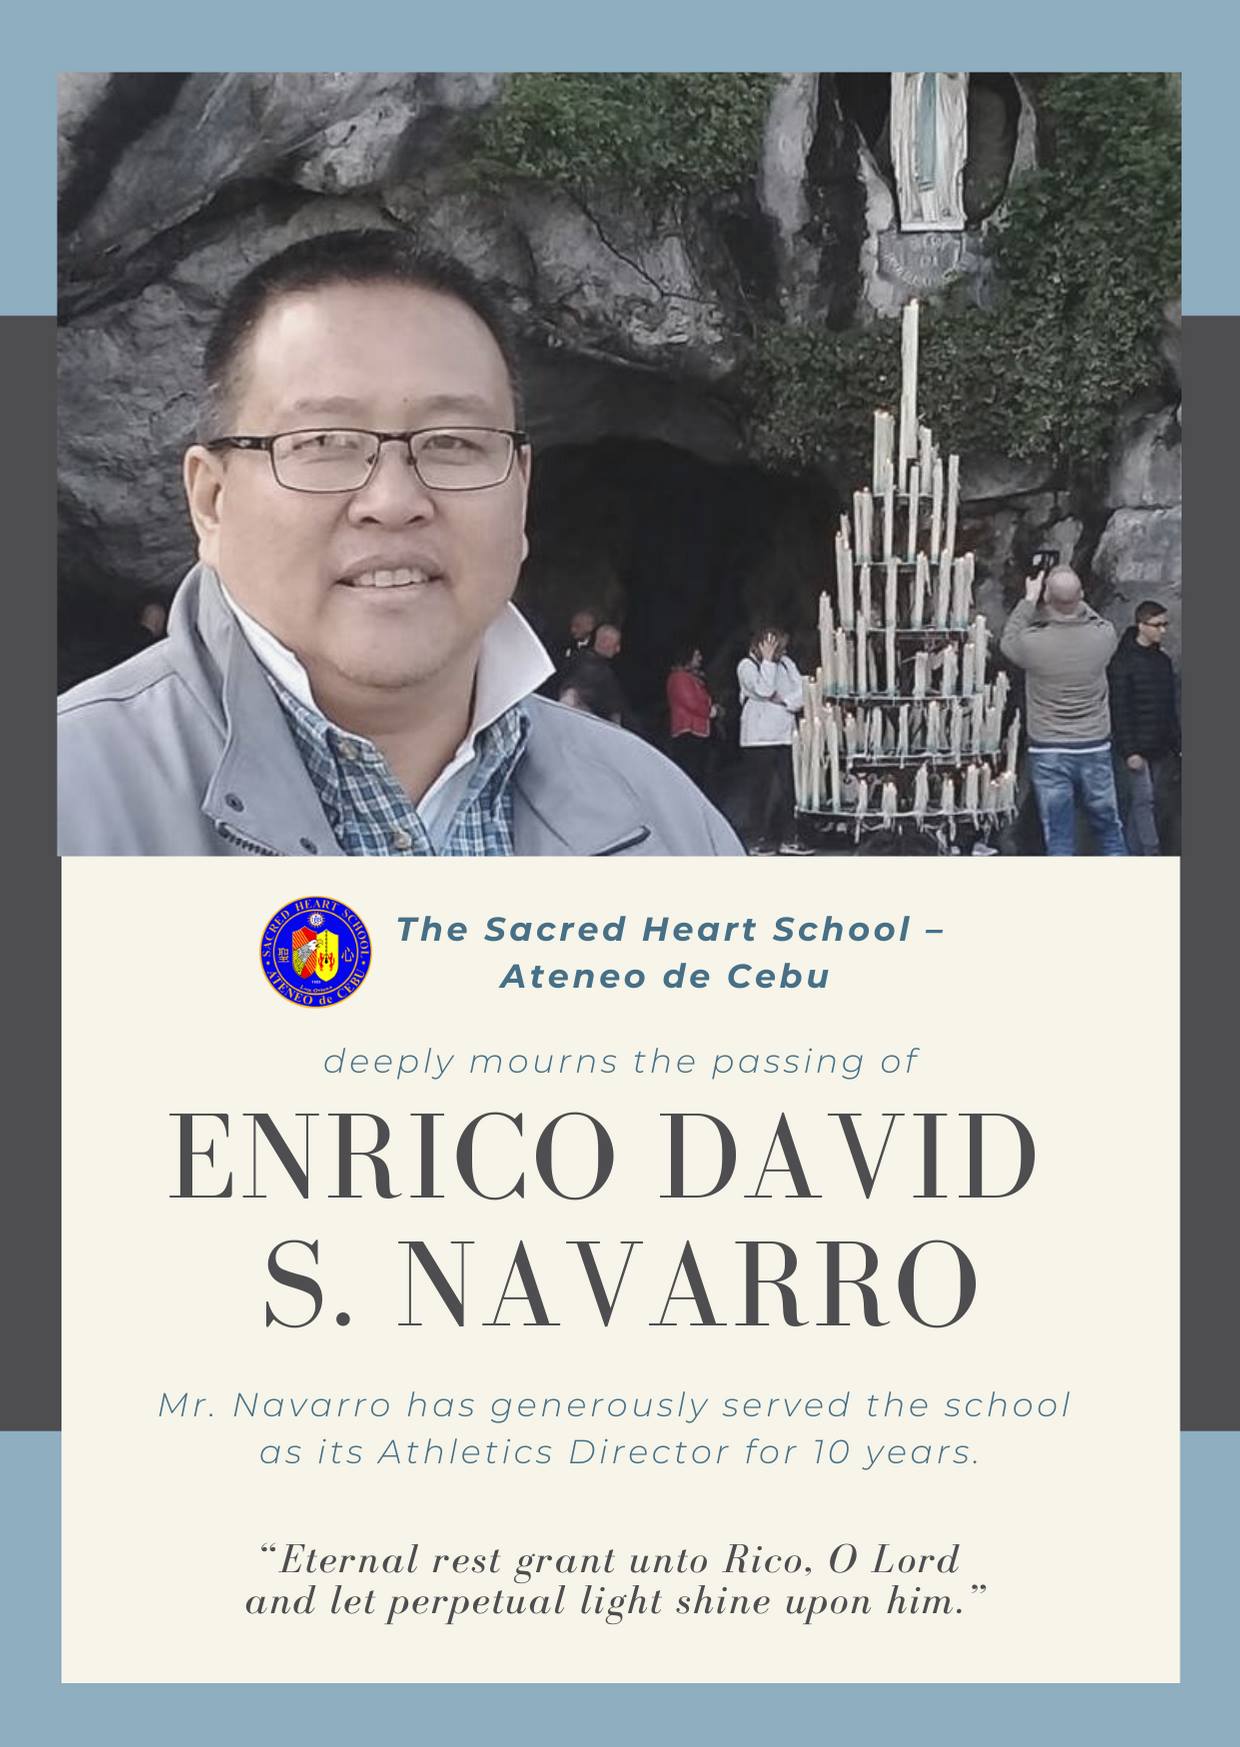 SHS-AdC deeply mourns the passing of Mr. Enrico David S. Navarro